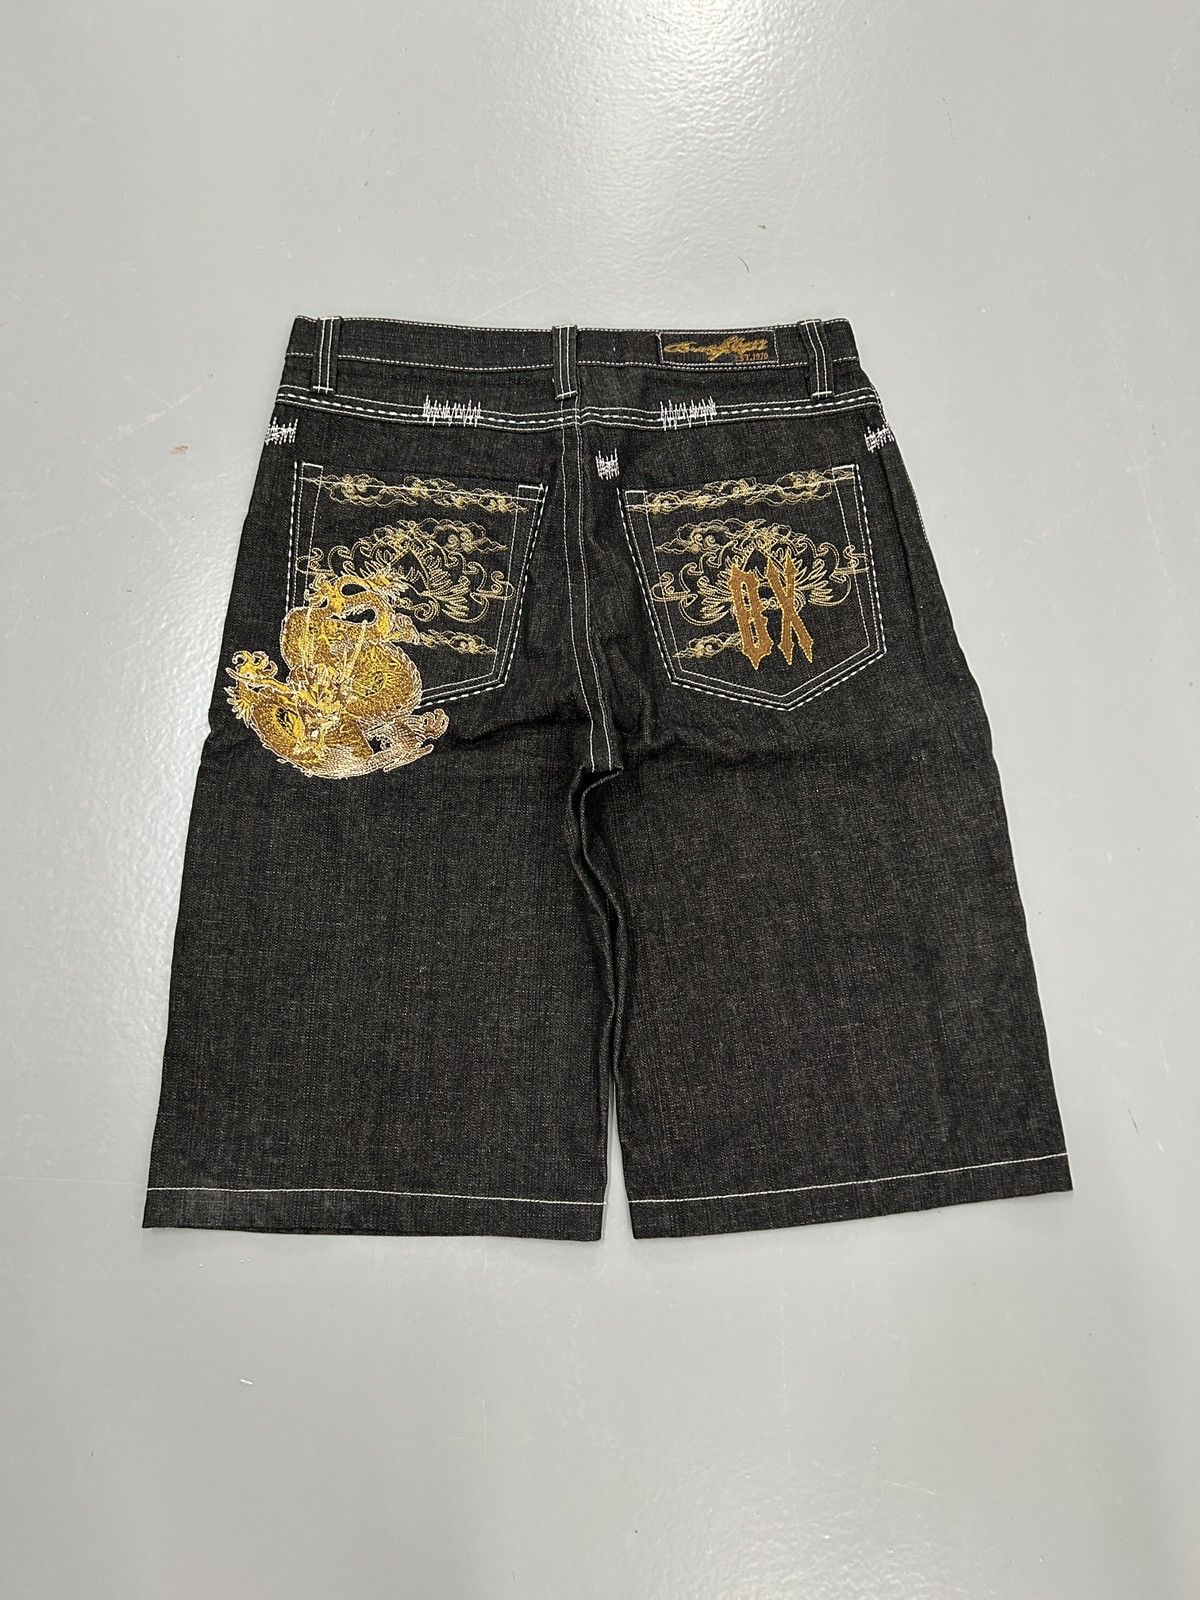 Pre-owned Jnco X Vintage Crazy Cyber Grunge Jnco Style Baggy Jorts Skater Essential In Black